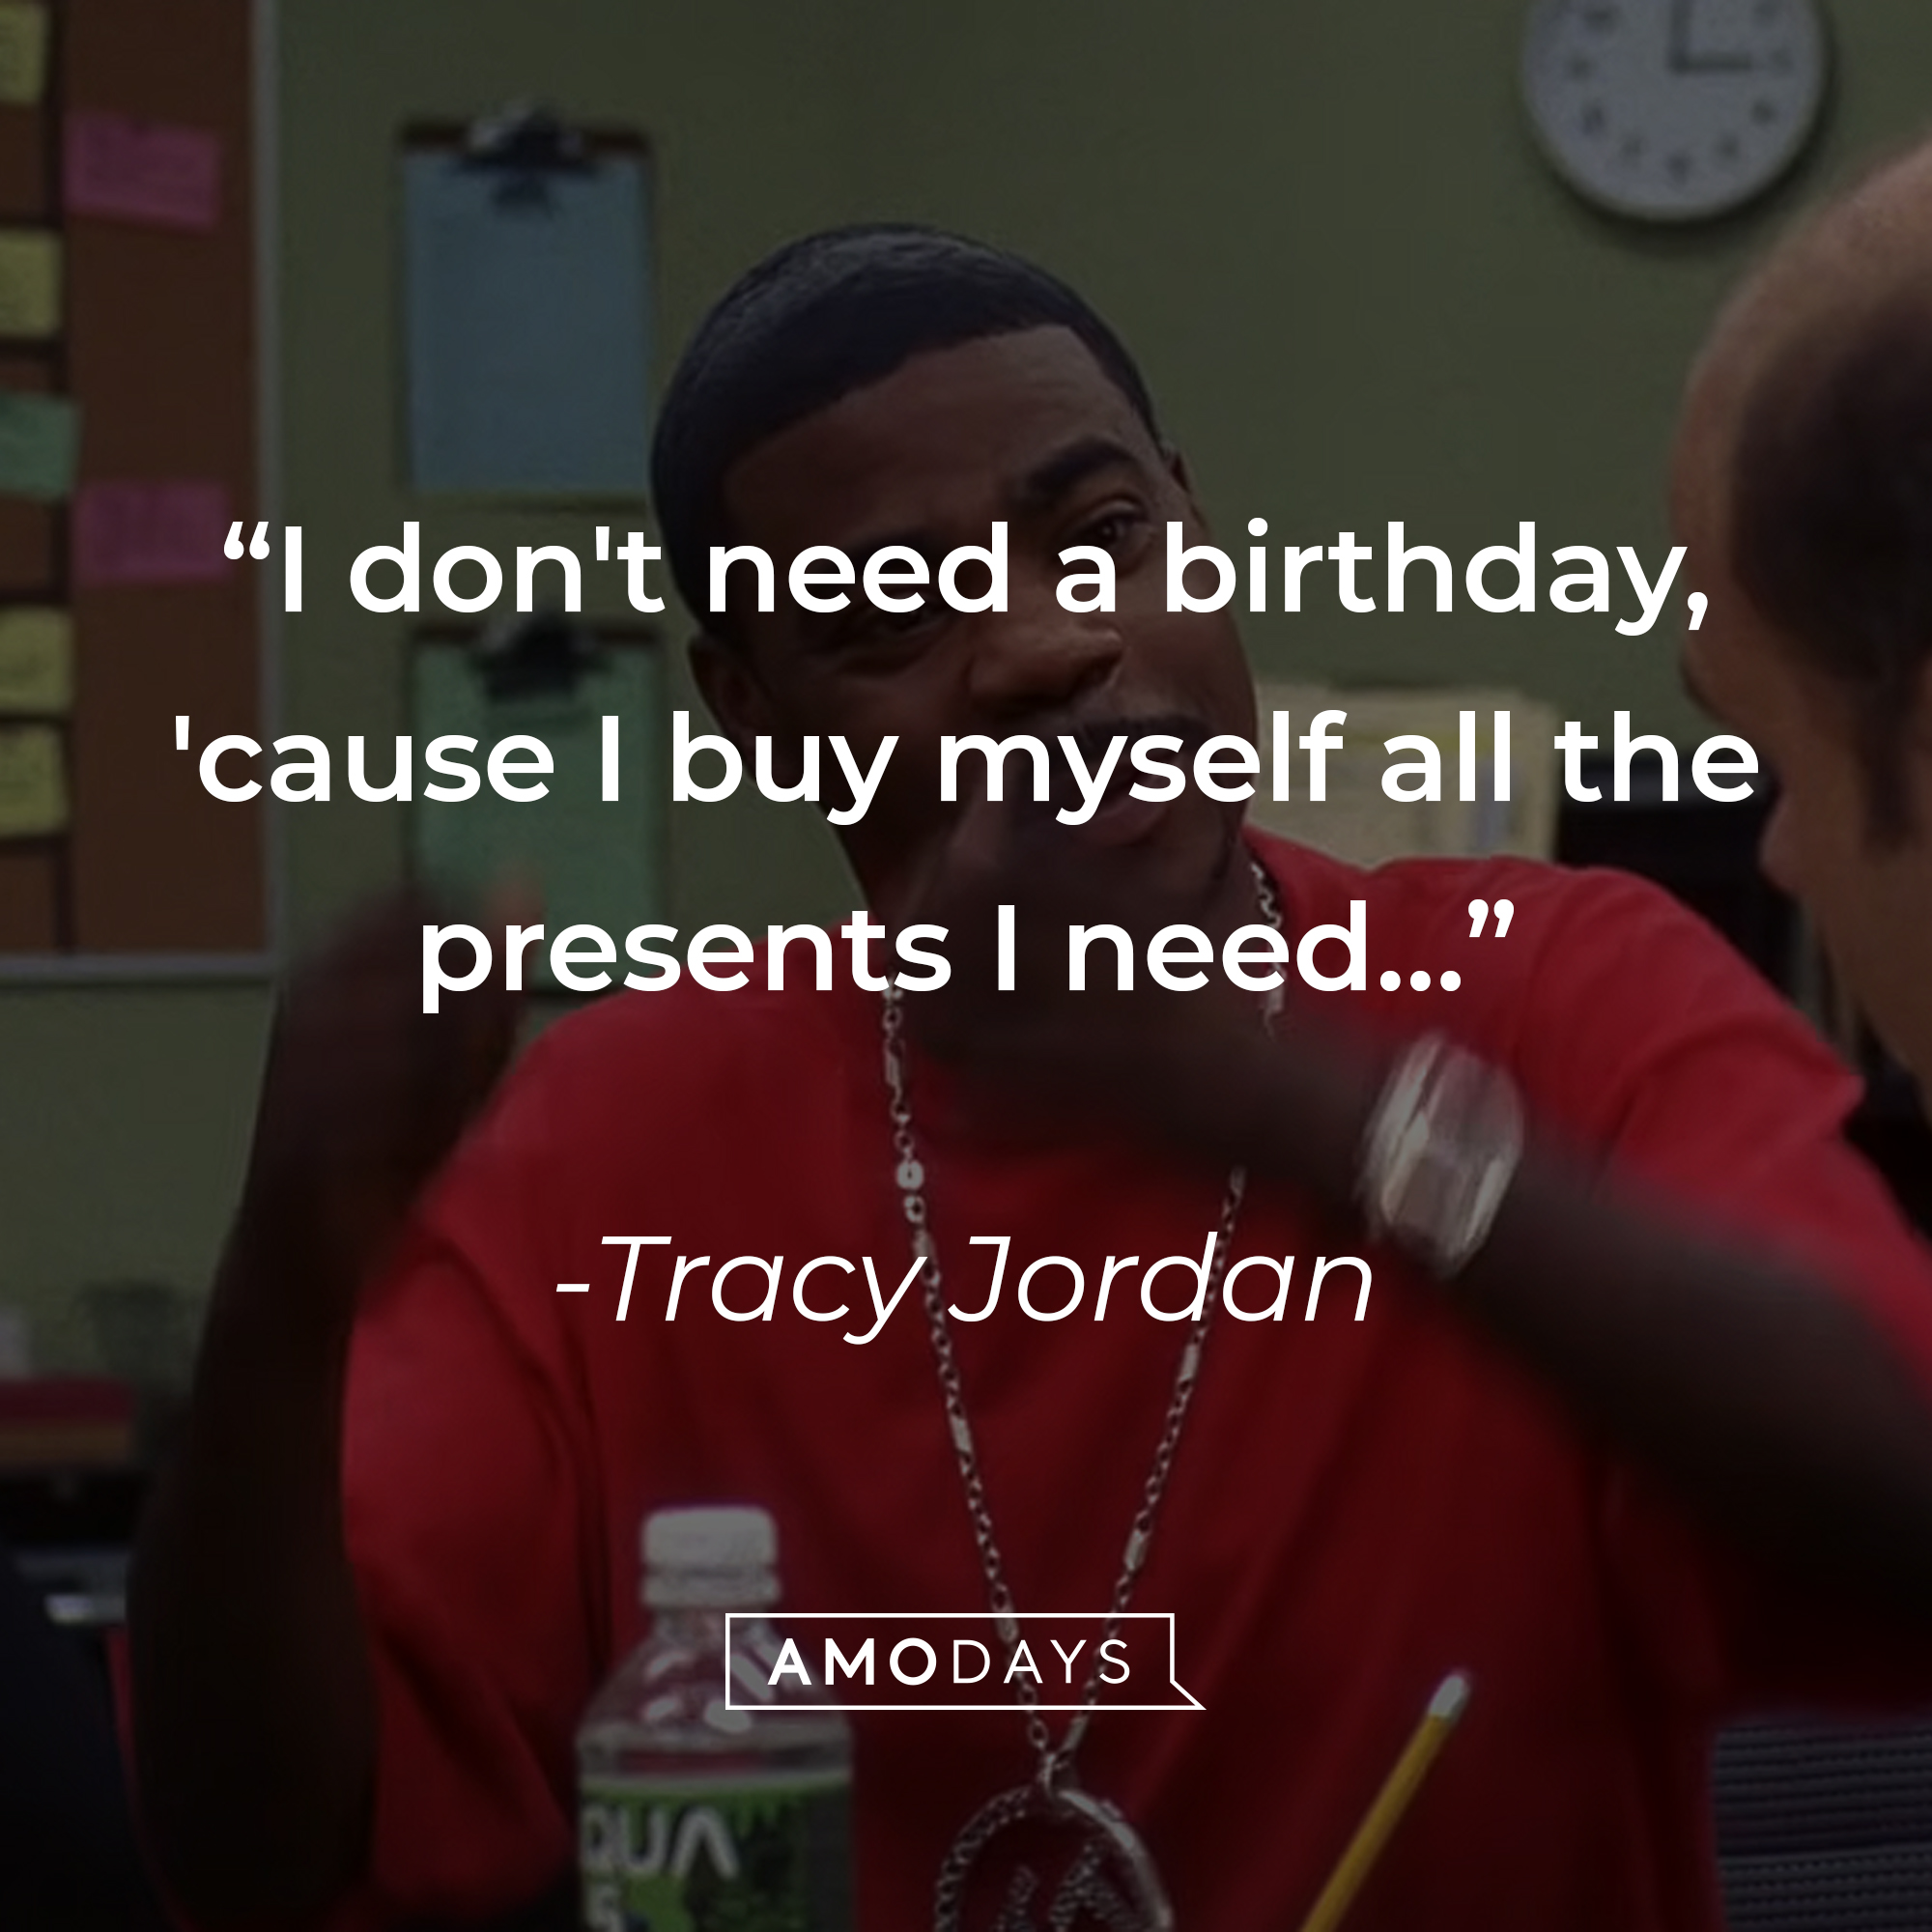 Tracy Jordan's quote, "I don't need a birthday 'cause I buy myself all the presents I need..." | Source: facebook.com/30RockTV